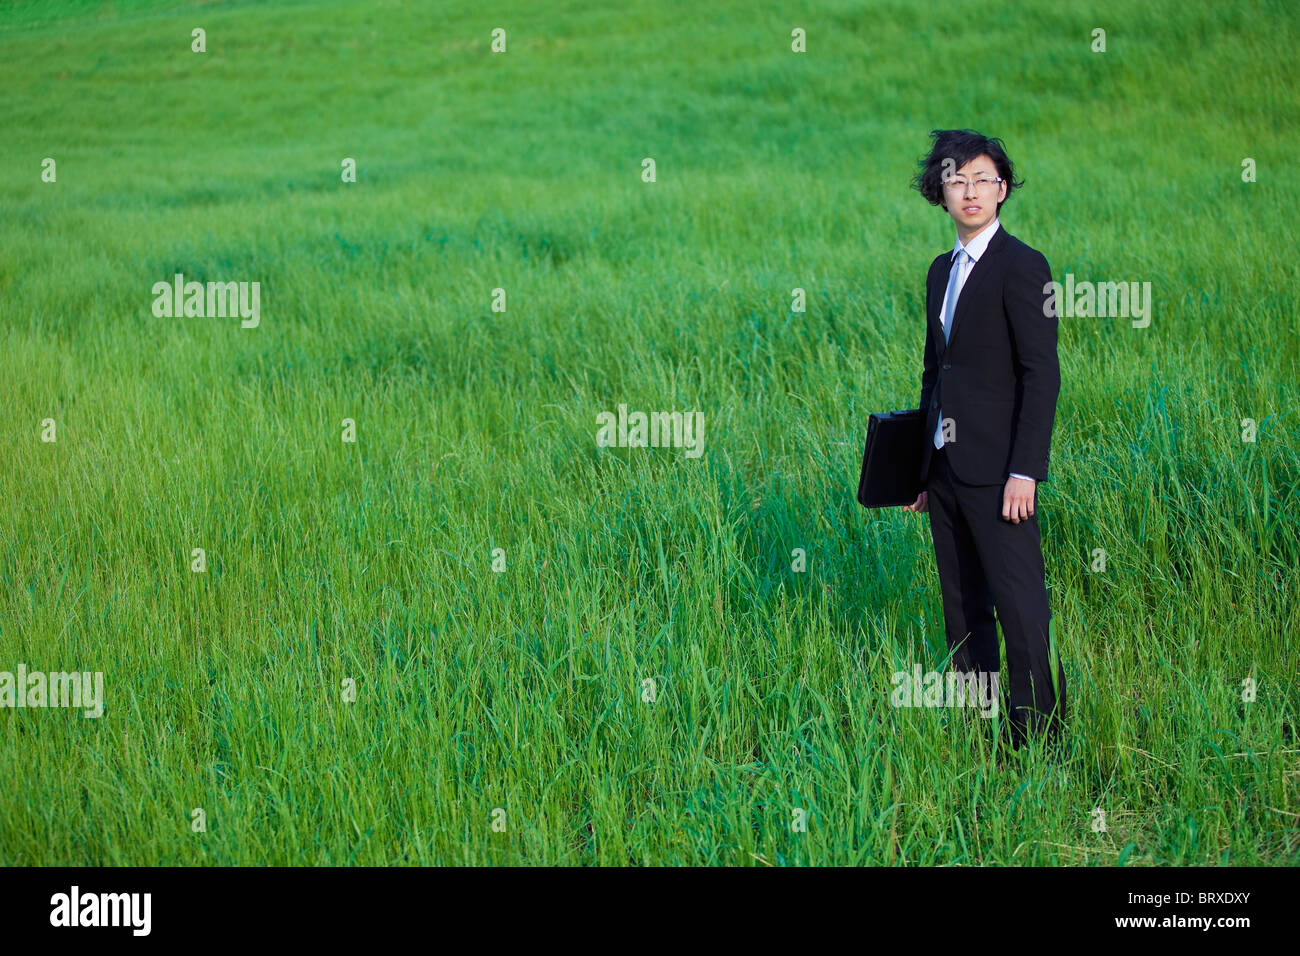 Businessman Standing in Field of Grass Stock Photo